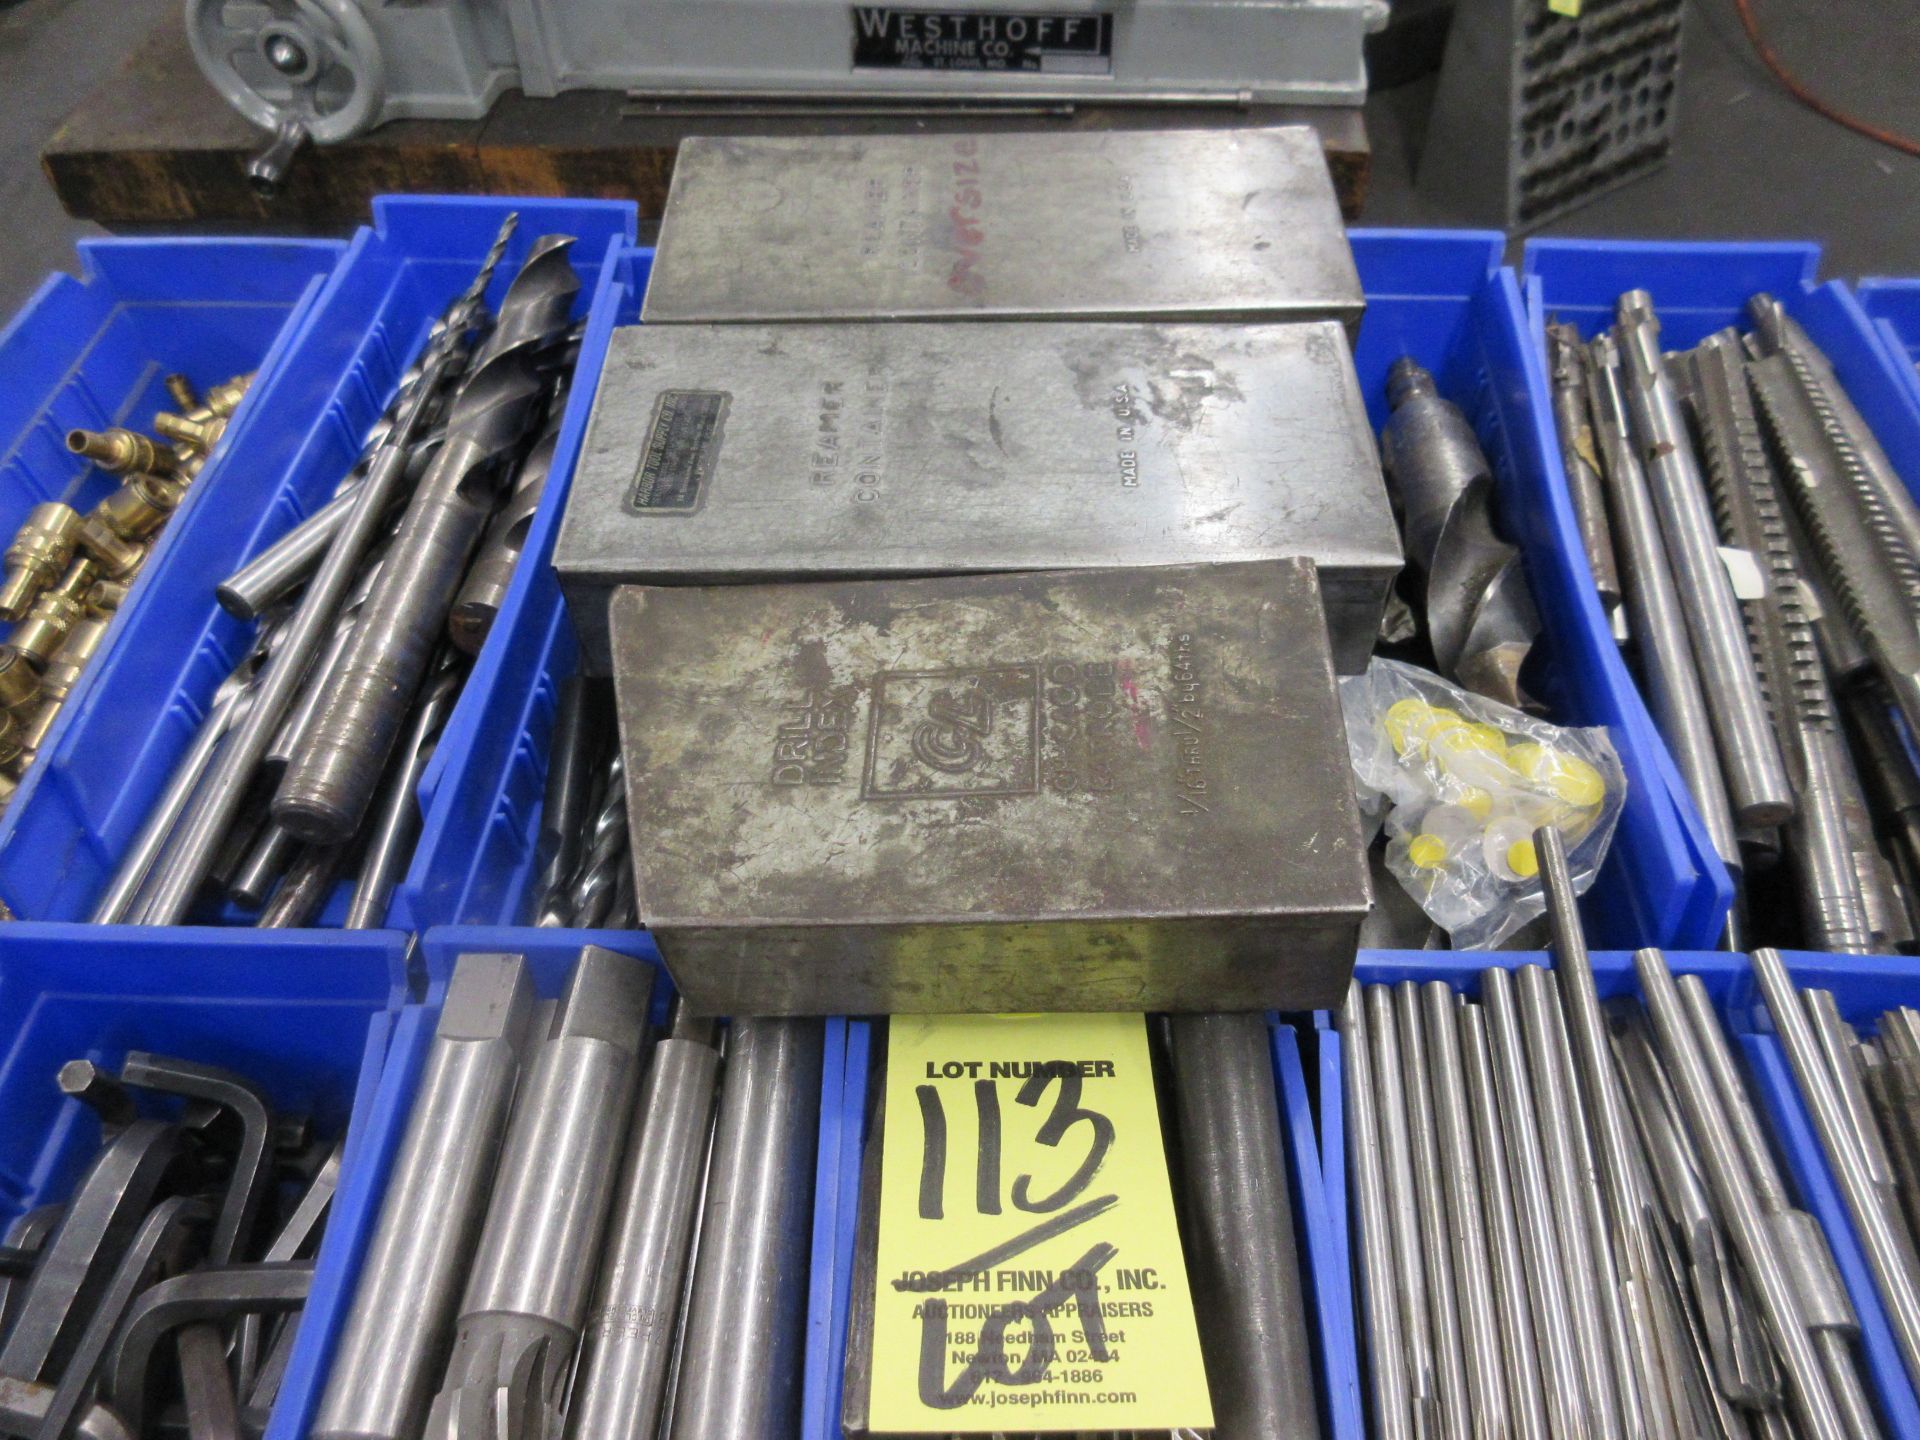 LOT Asst. Reamers, Drills, Allen Wrenches, Connectors in (14), (3) Drill Indexes - Image 4 of 4